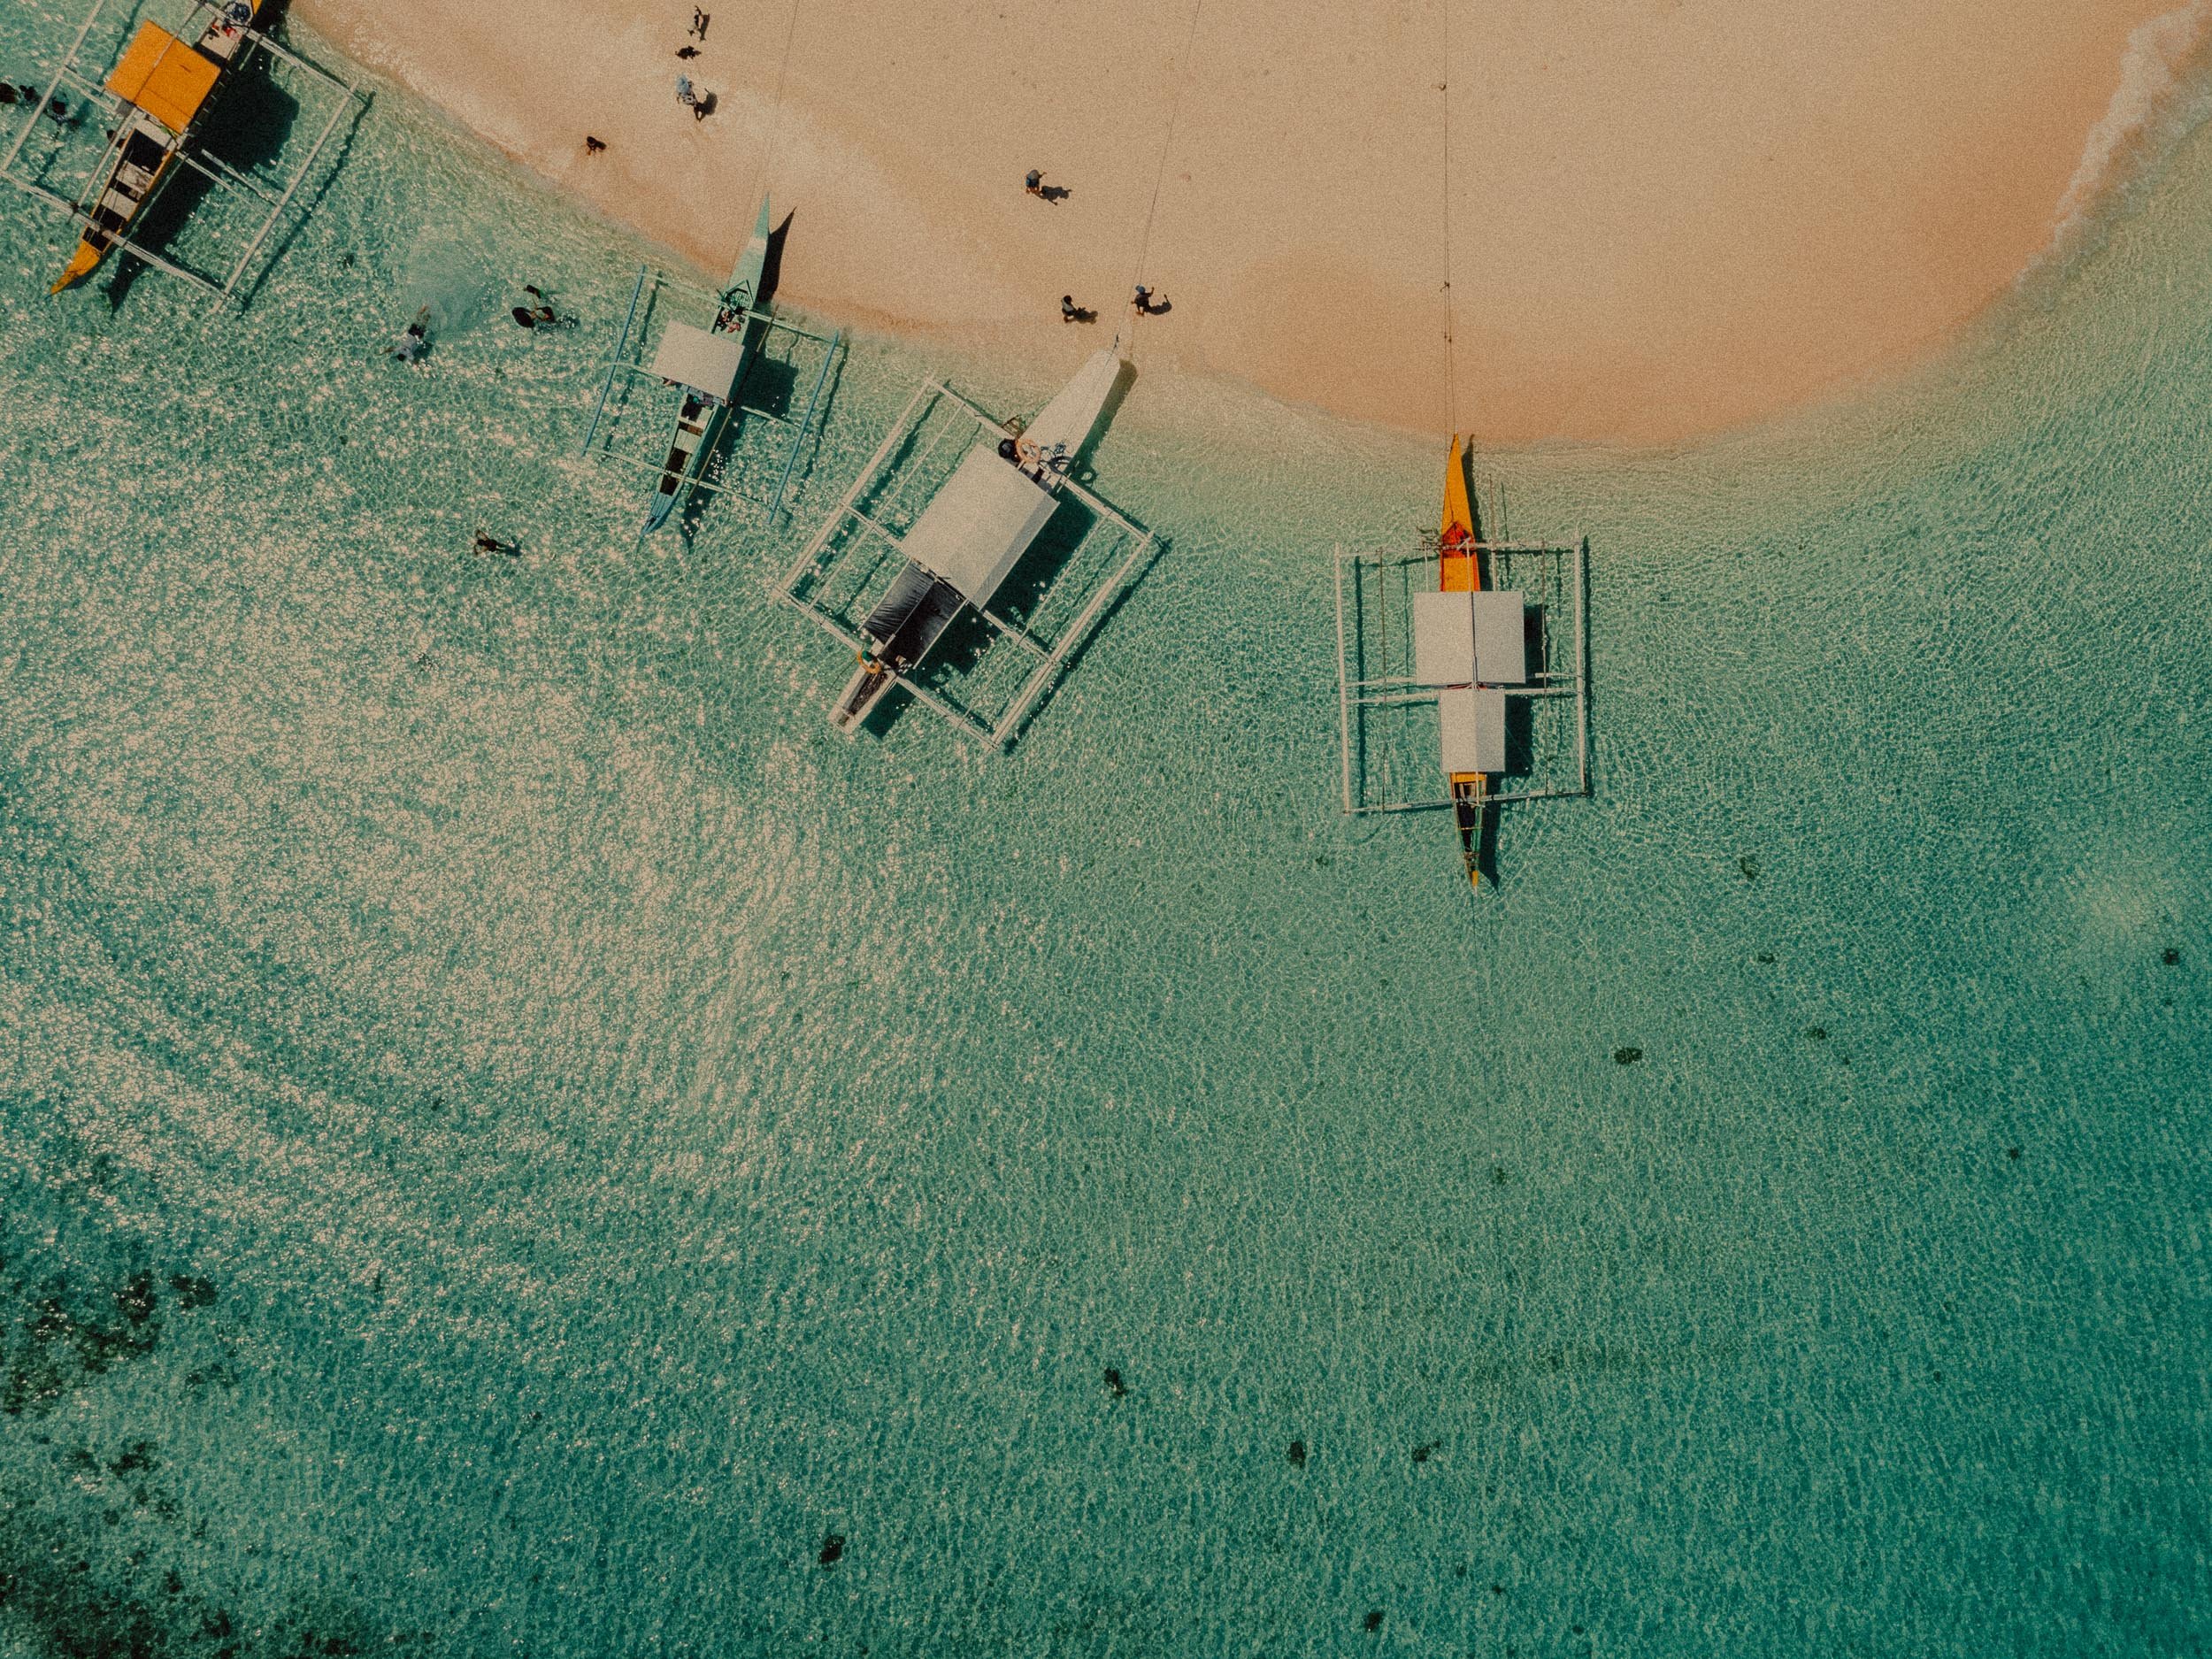 6-Siargao Drone Photography-A bird's-eye view aerial photo of boats moored in Naked Island, Siargao, Philippines, Southeast Asia, April 2022, Mavic 2 Pro, Hasselblad L1D-20c.jpg